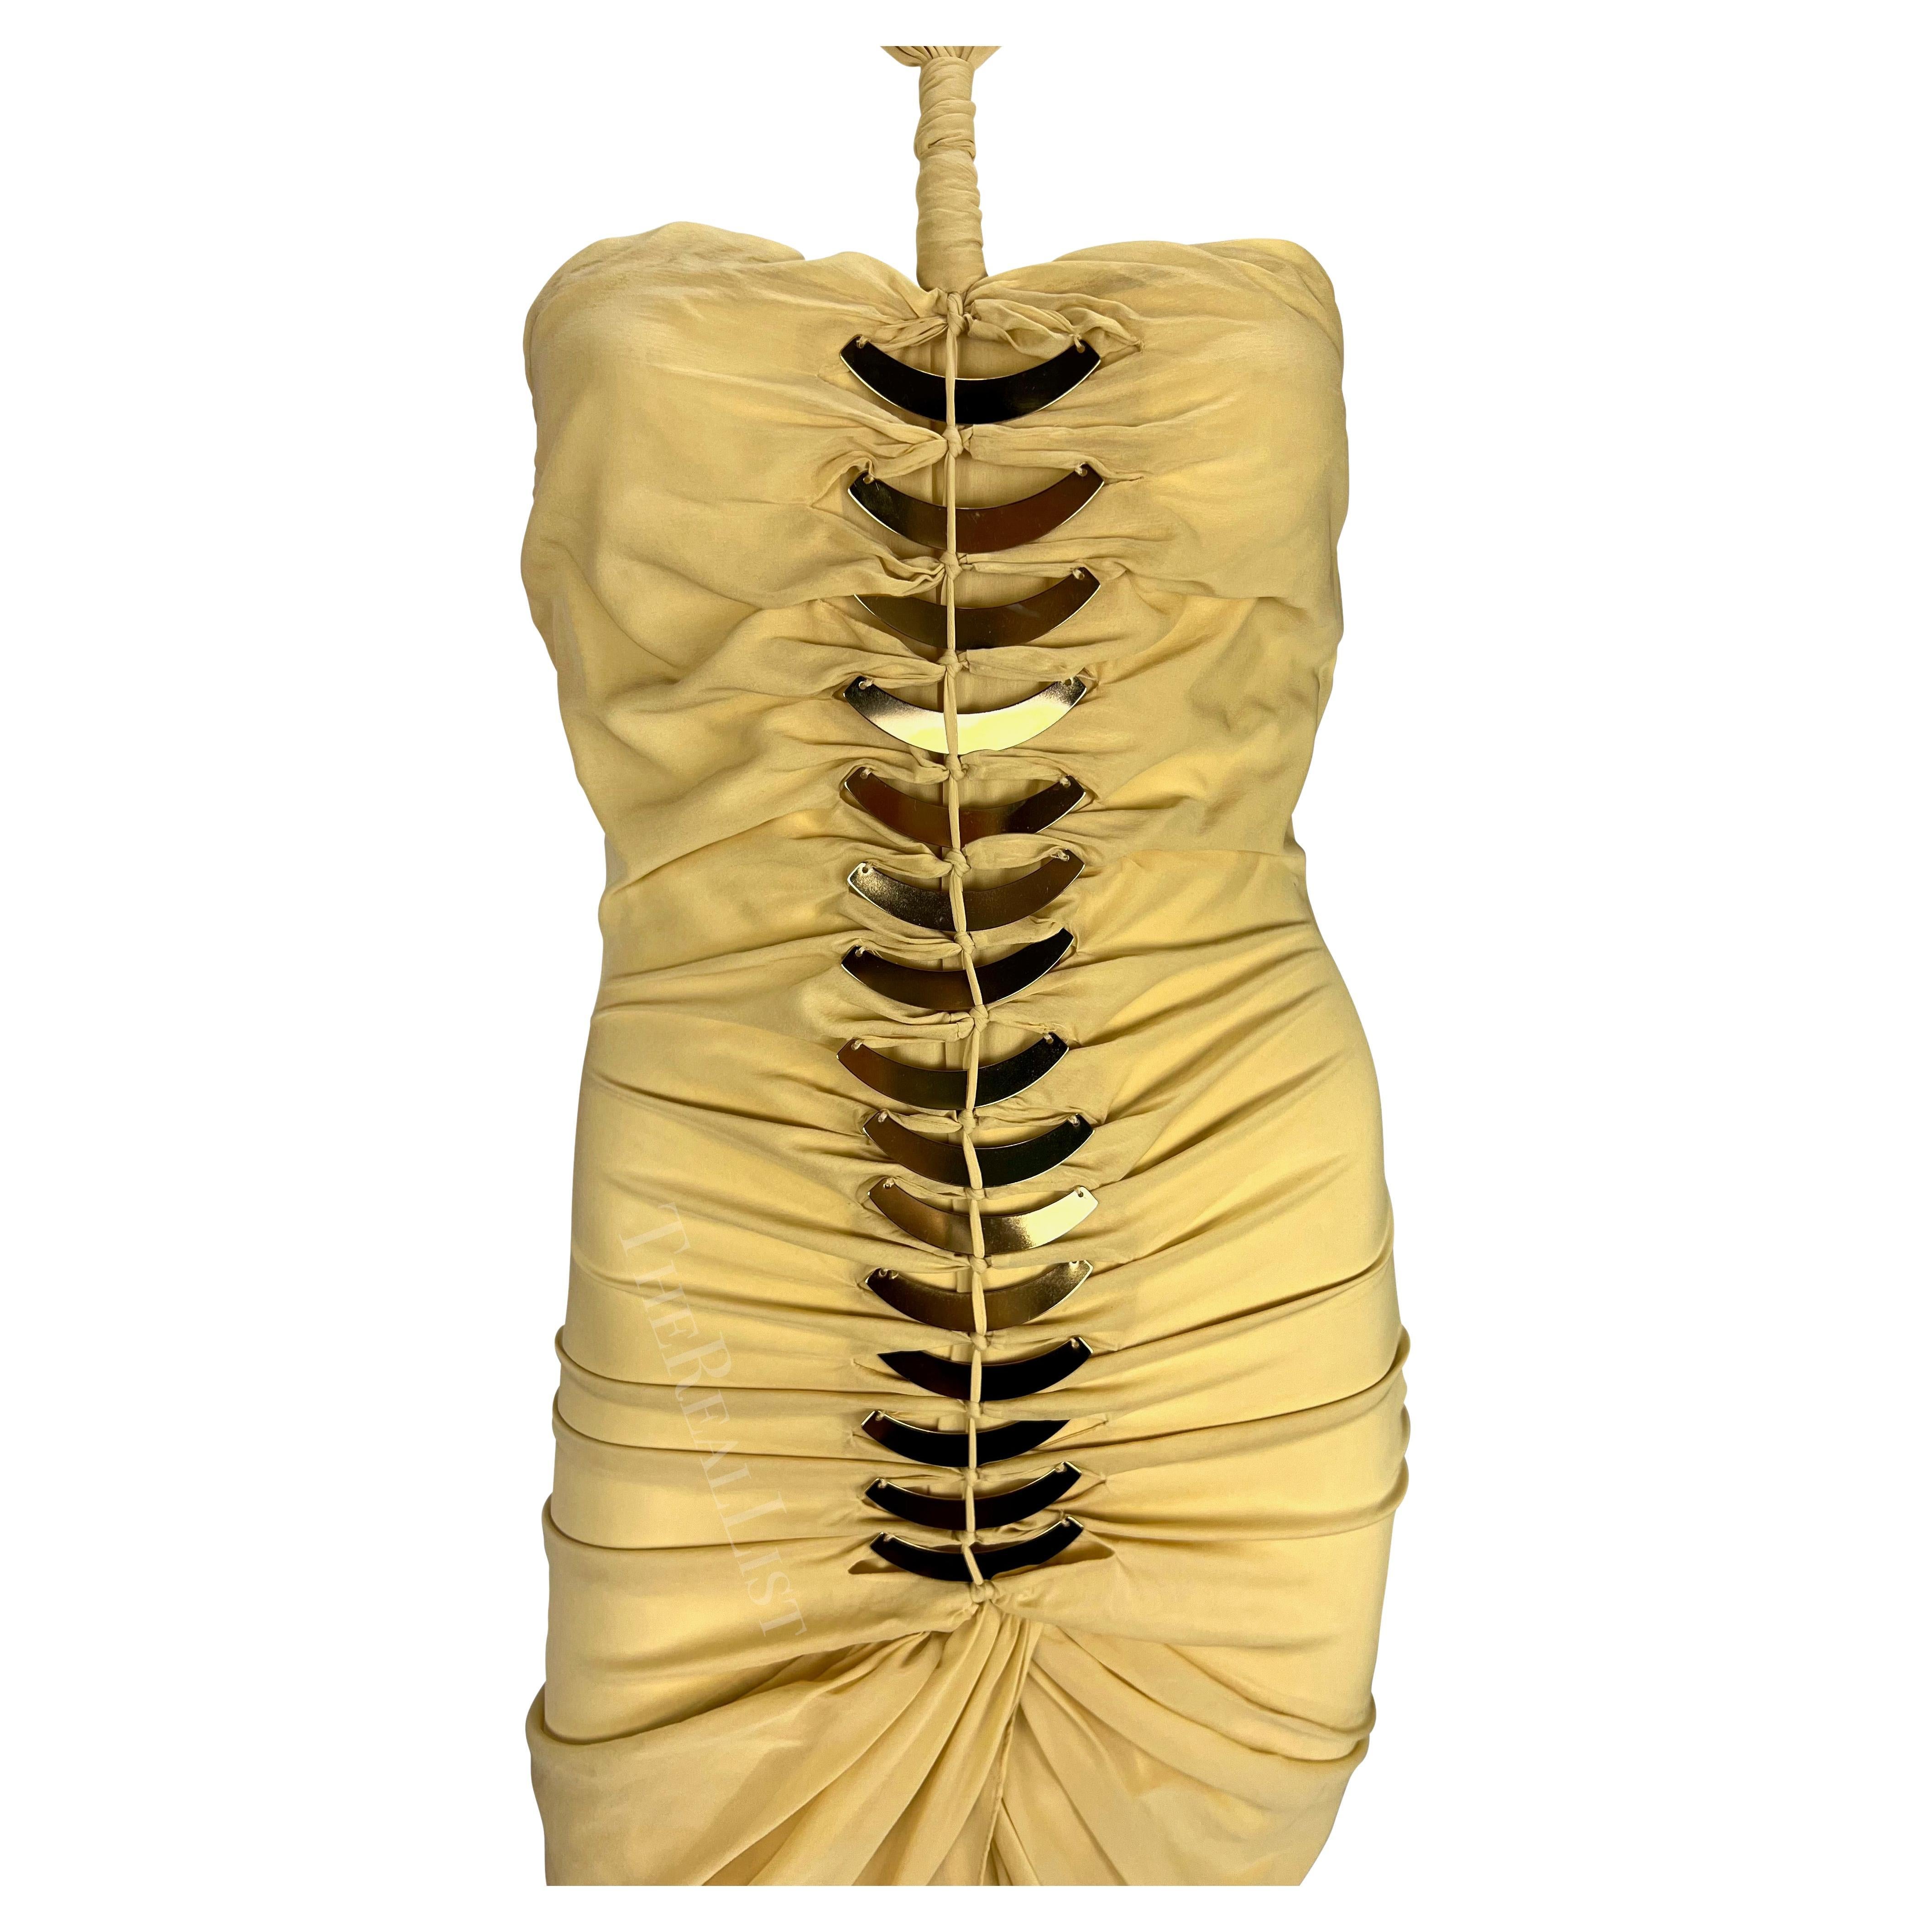 S/S 2005 Gucci Beige Cutout Gold-Tone Metal Spine Bodycon Mini Dress In Good Condition For Sale In West Hollywood, CA